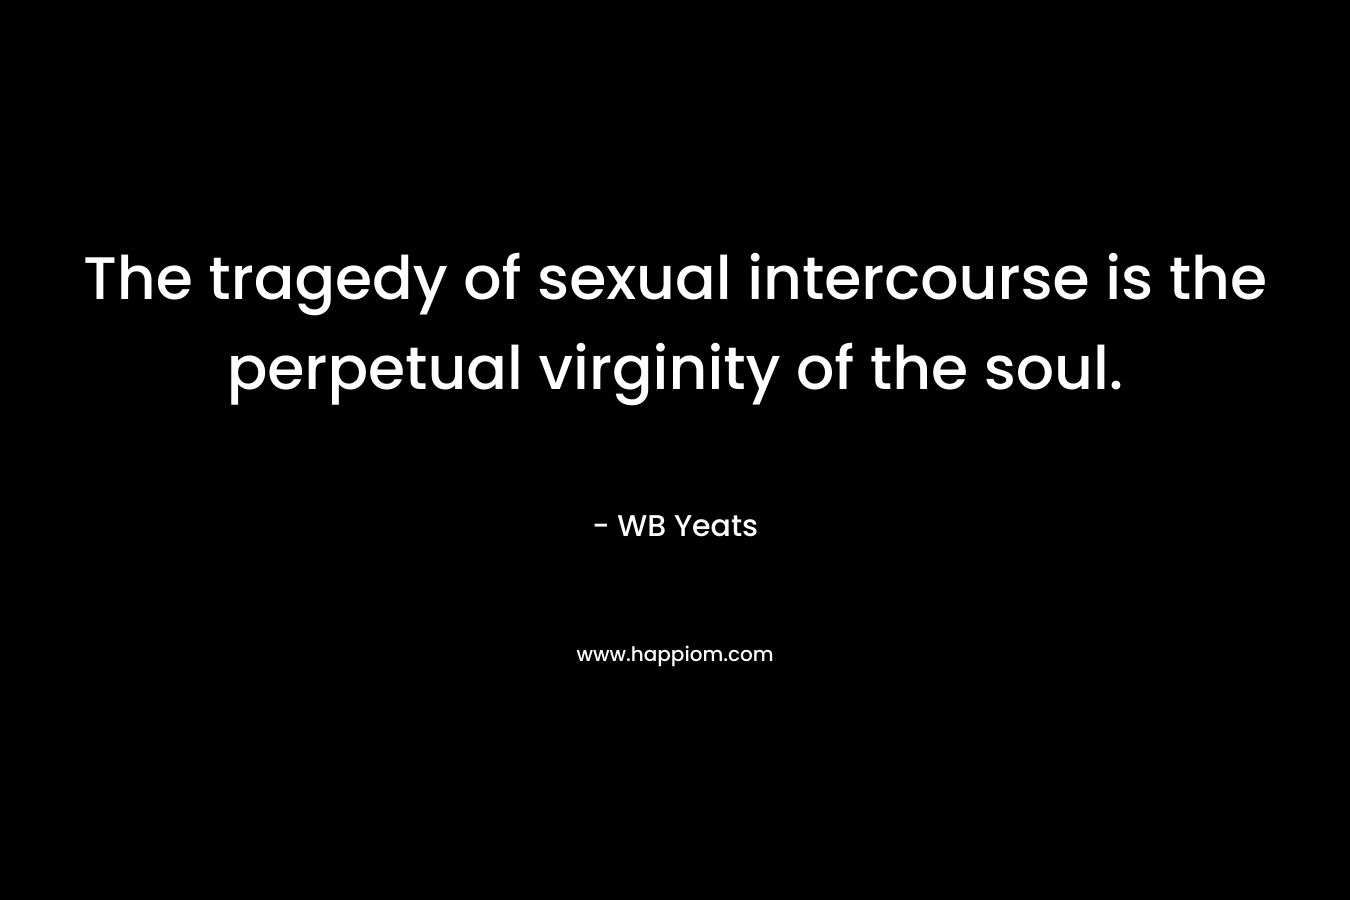 The tragedy of sexual intercourse is the perpetual virginity of the soul. – WB Yeats